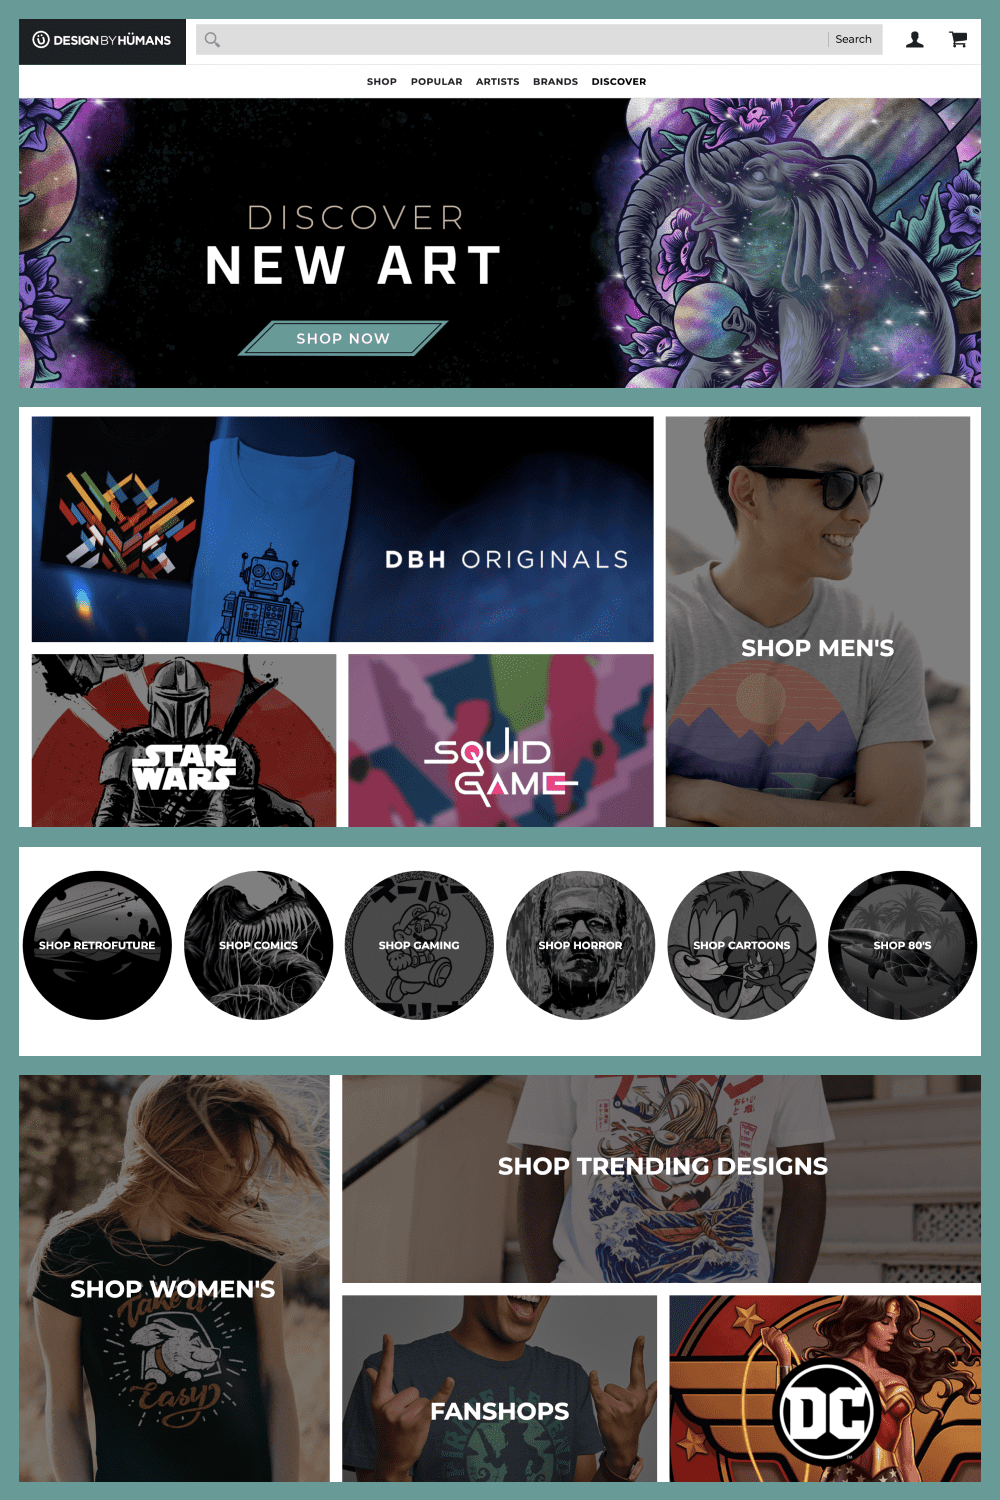 Spin the Wheel to Get a 15% Discount and Share Your Projects with DesignByHumans.